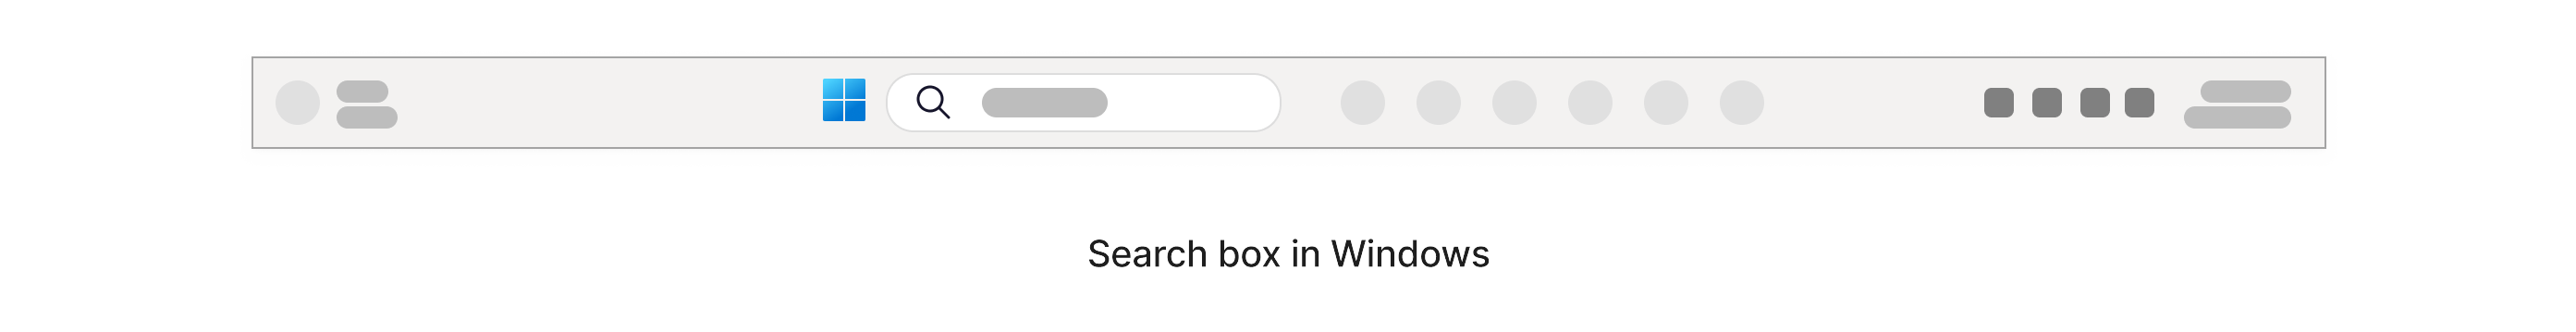 Search box with a magnifying icon icon in it located within the Windows taskbar at the bottom of the screen.